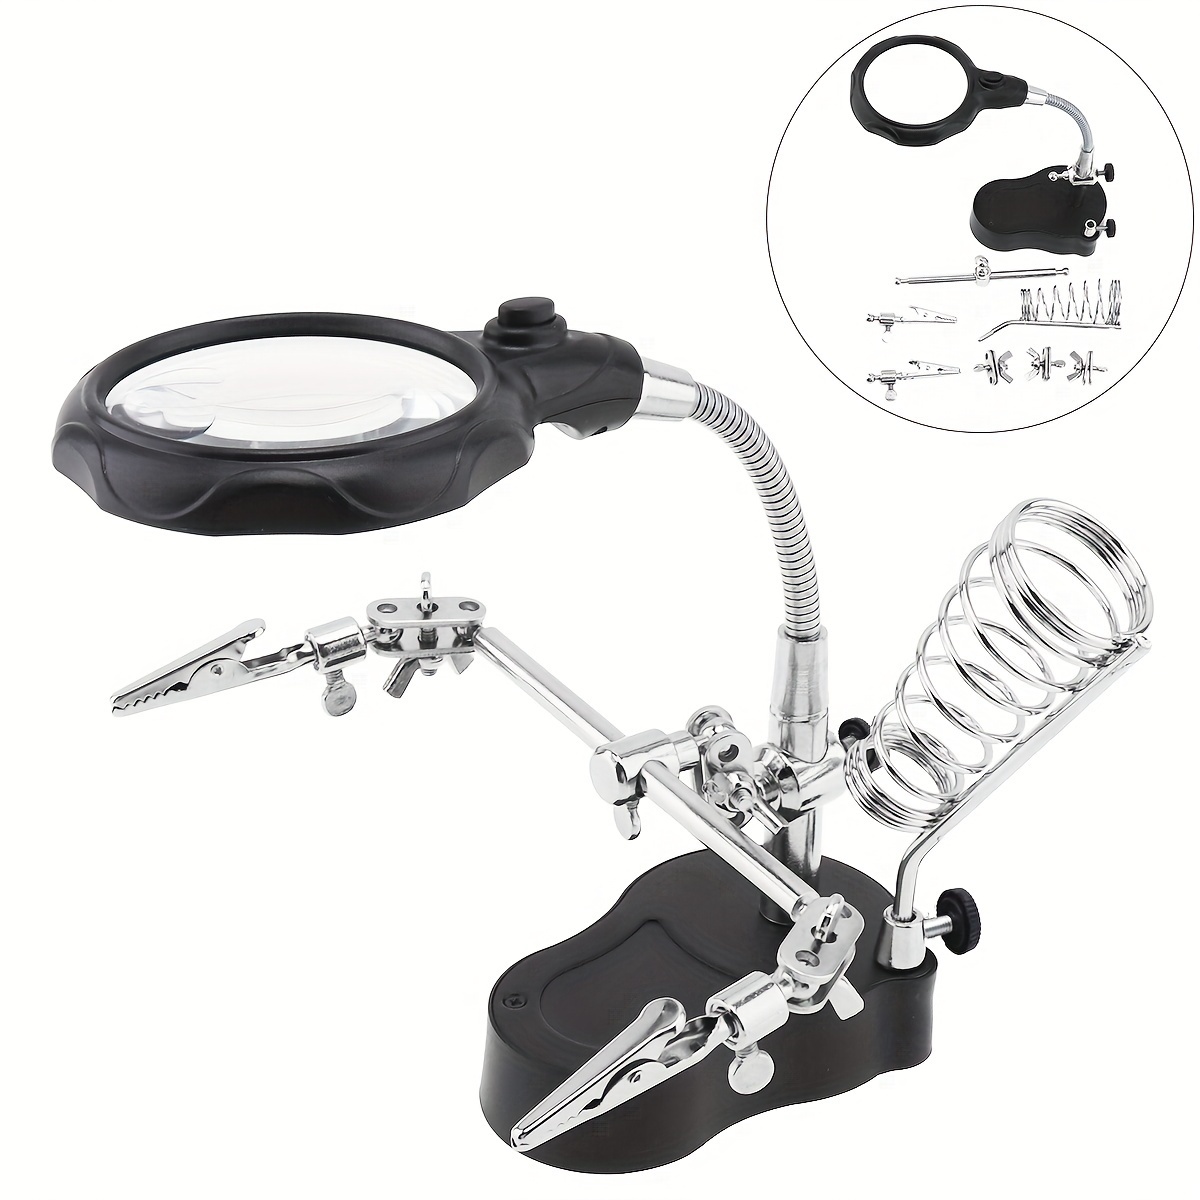 

Multi-functional Welding Led Magnifier Magnifying Glass Alligator Clip Holder Clamp Helping Hand Soldering Repair Tool